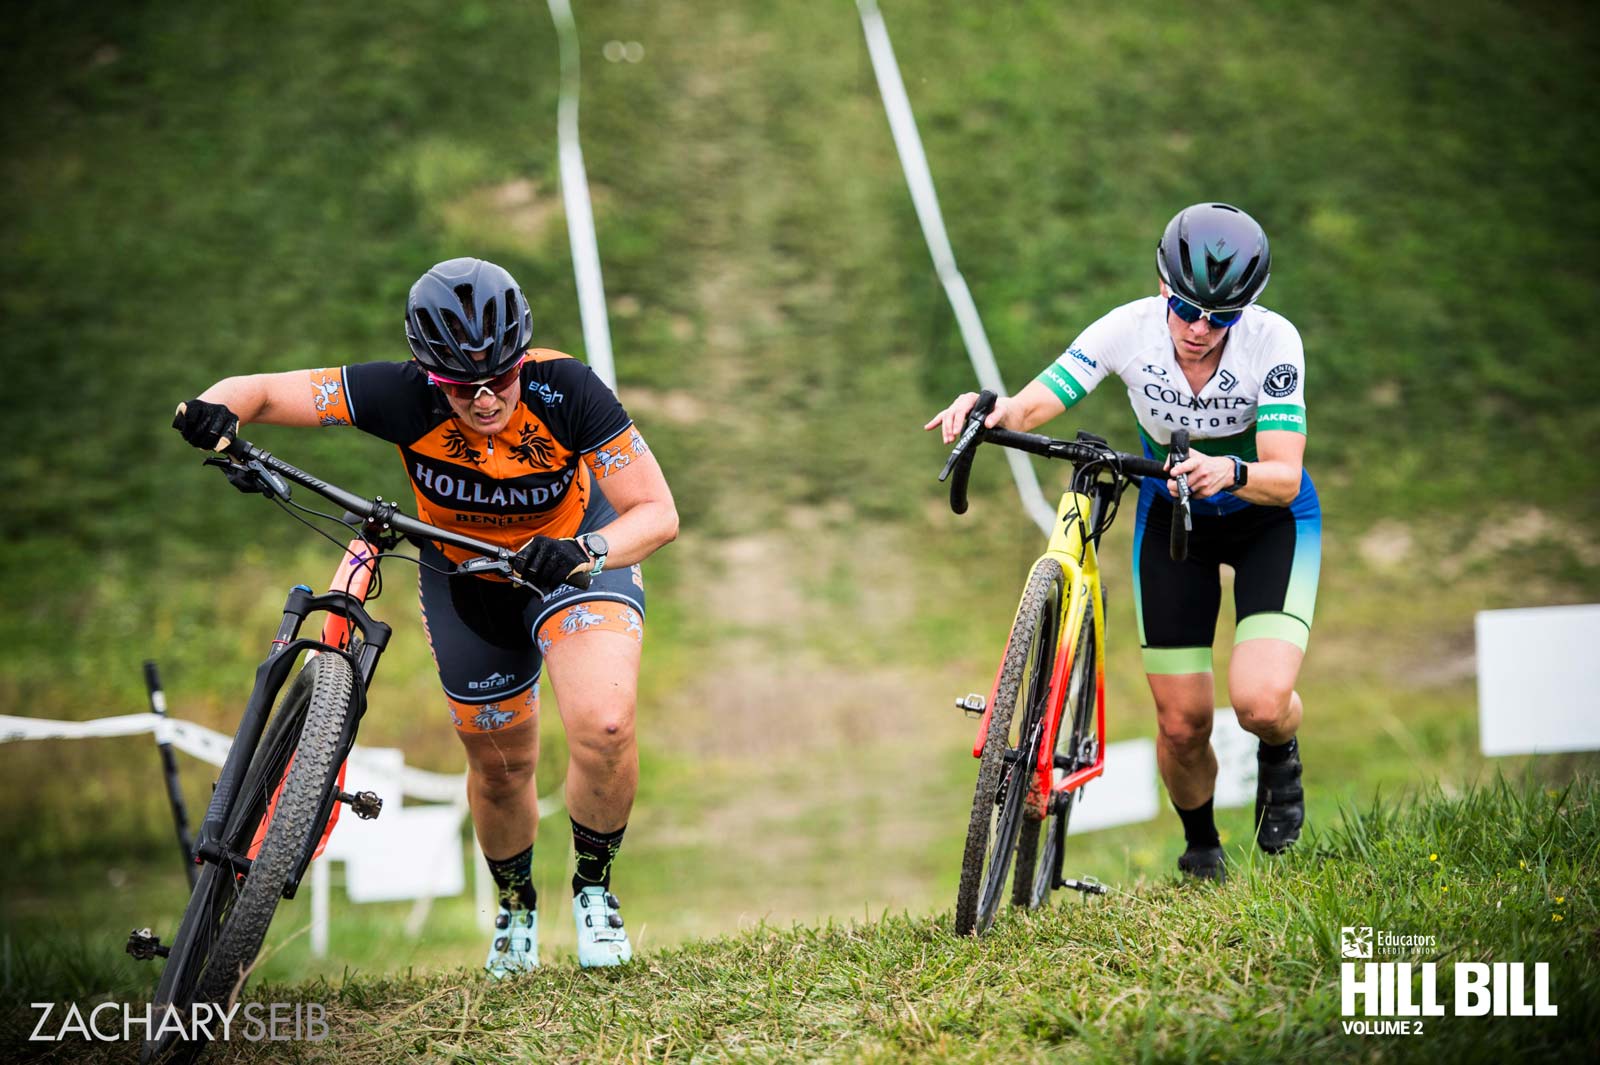 Looking down on two cyclocross racers pushing bikes up a steep hill.